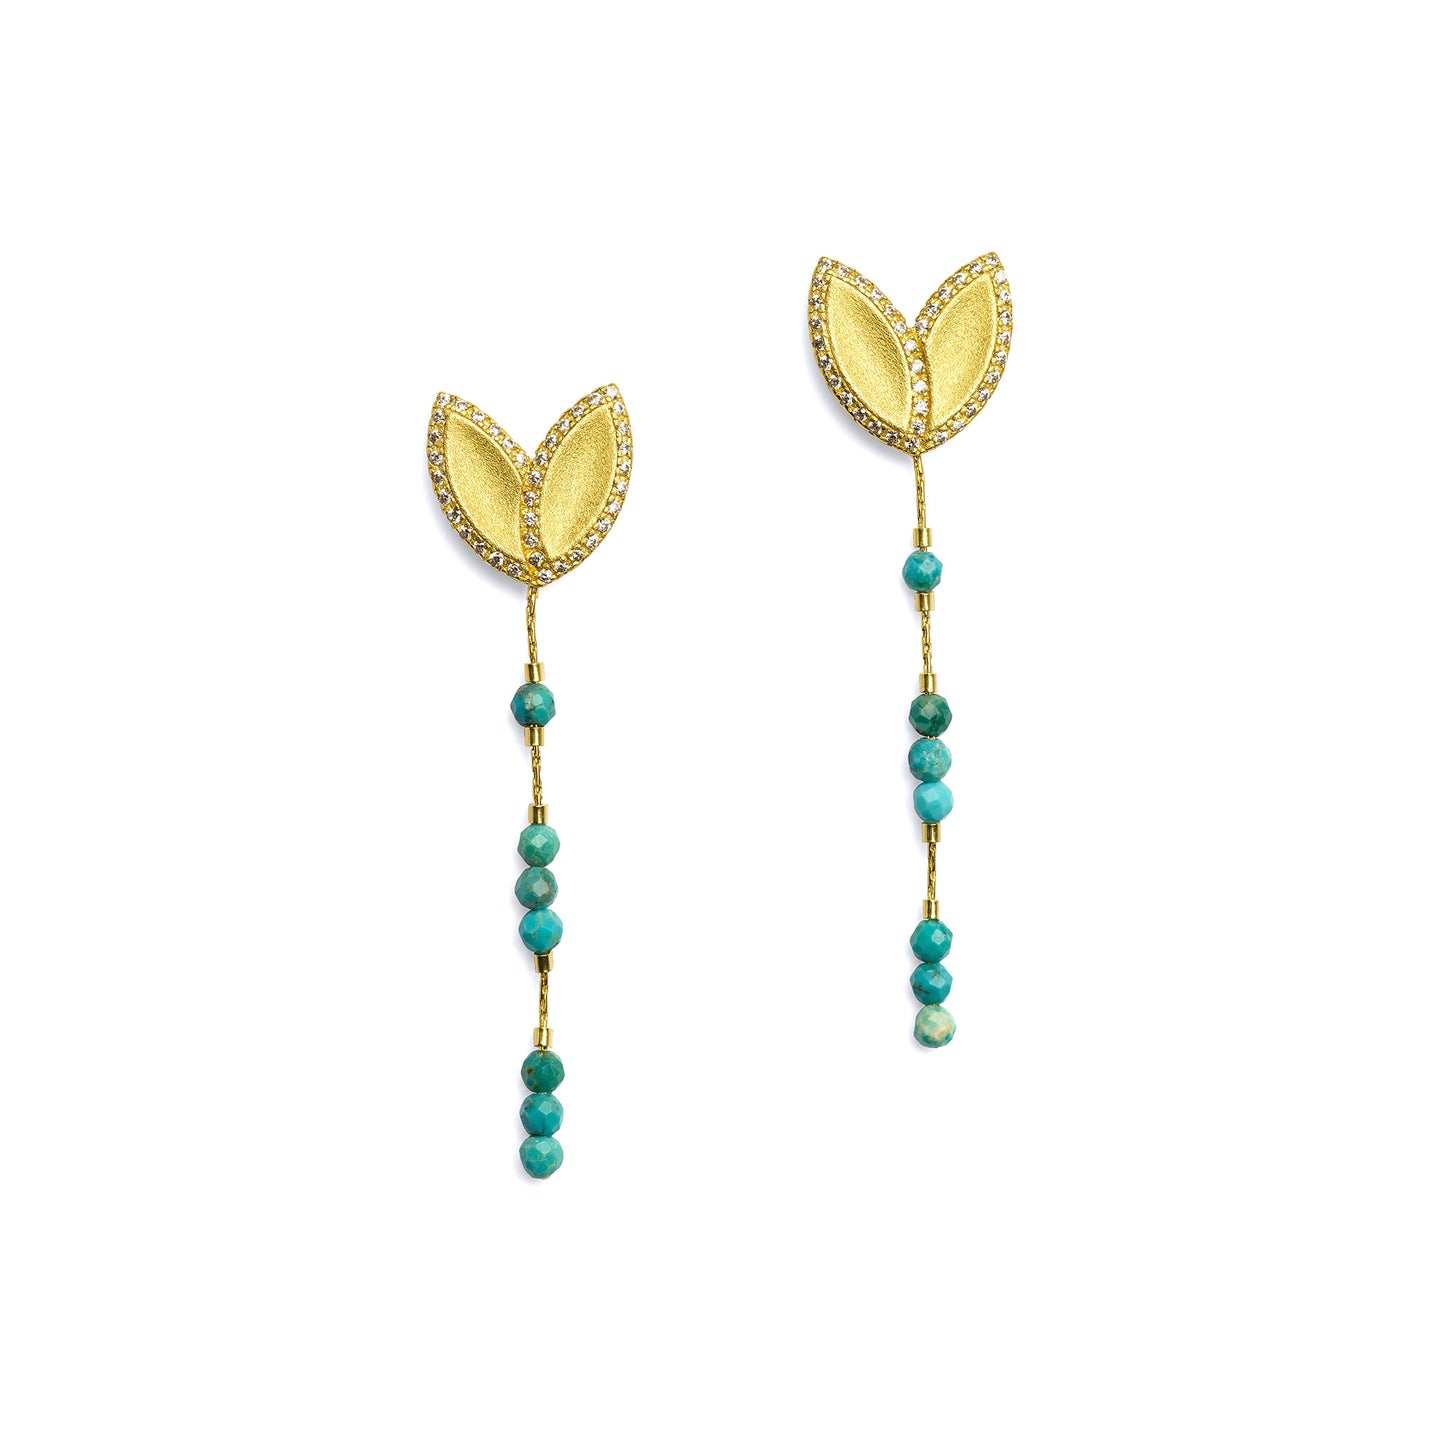 Bernd Wolf Collection "Navendi" Turquoise Earrings